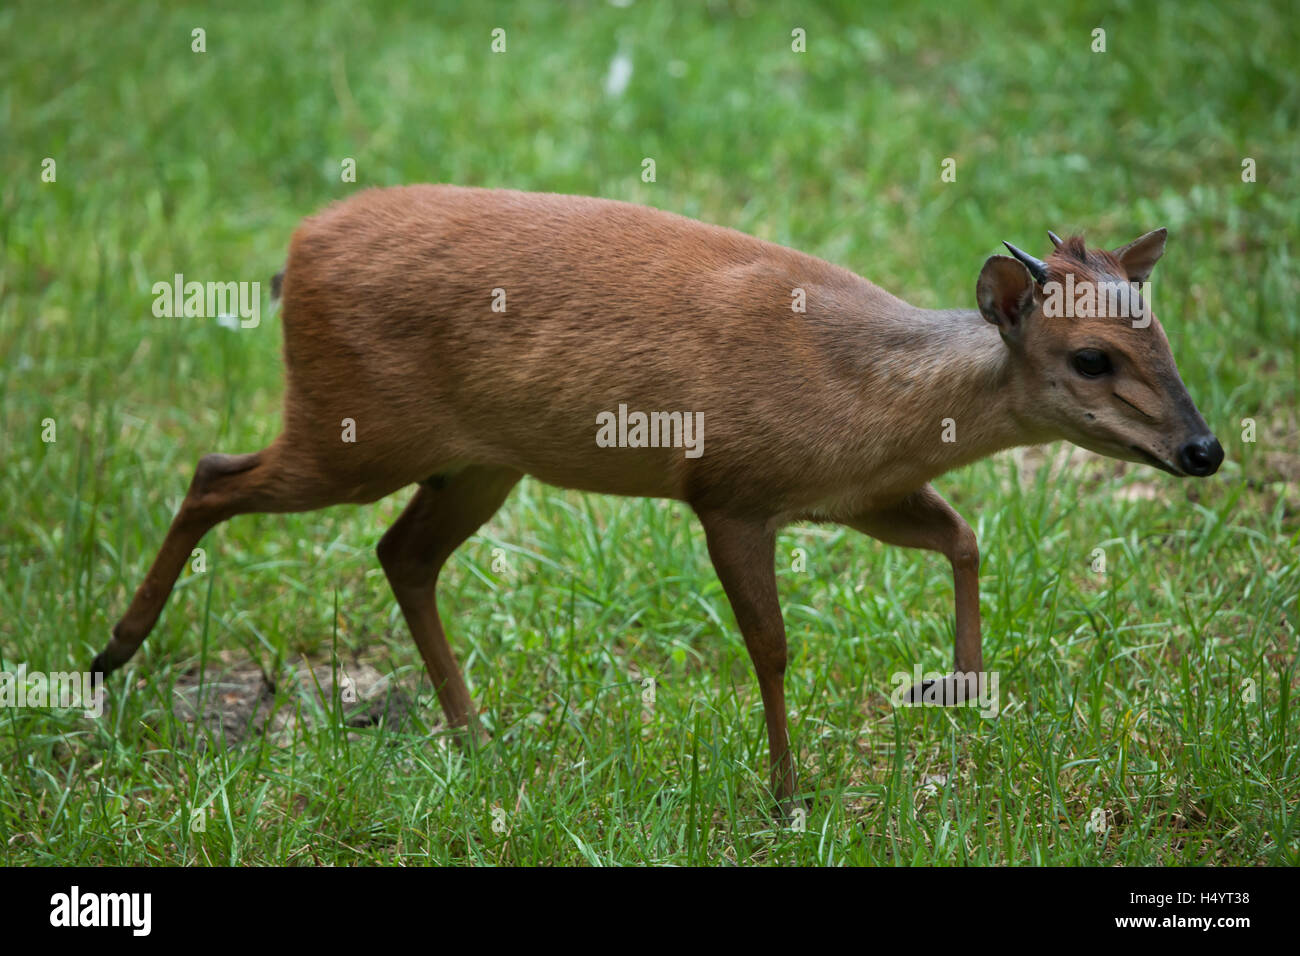 Red forest duiker (Cephalophus natalensis), also known as the Natal duiker. Wildlife animal. Stock Photo